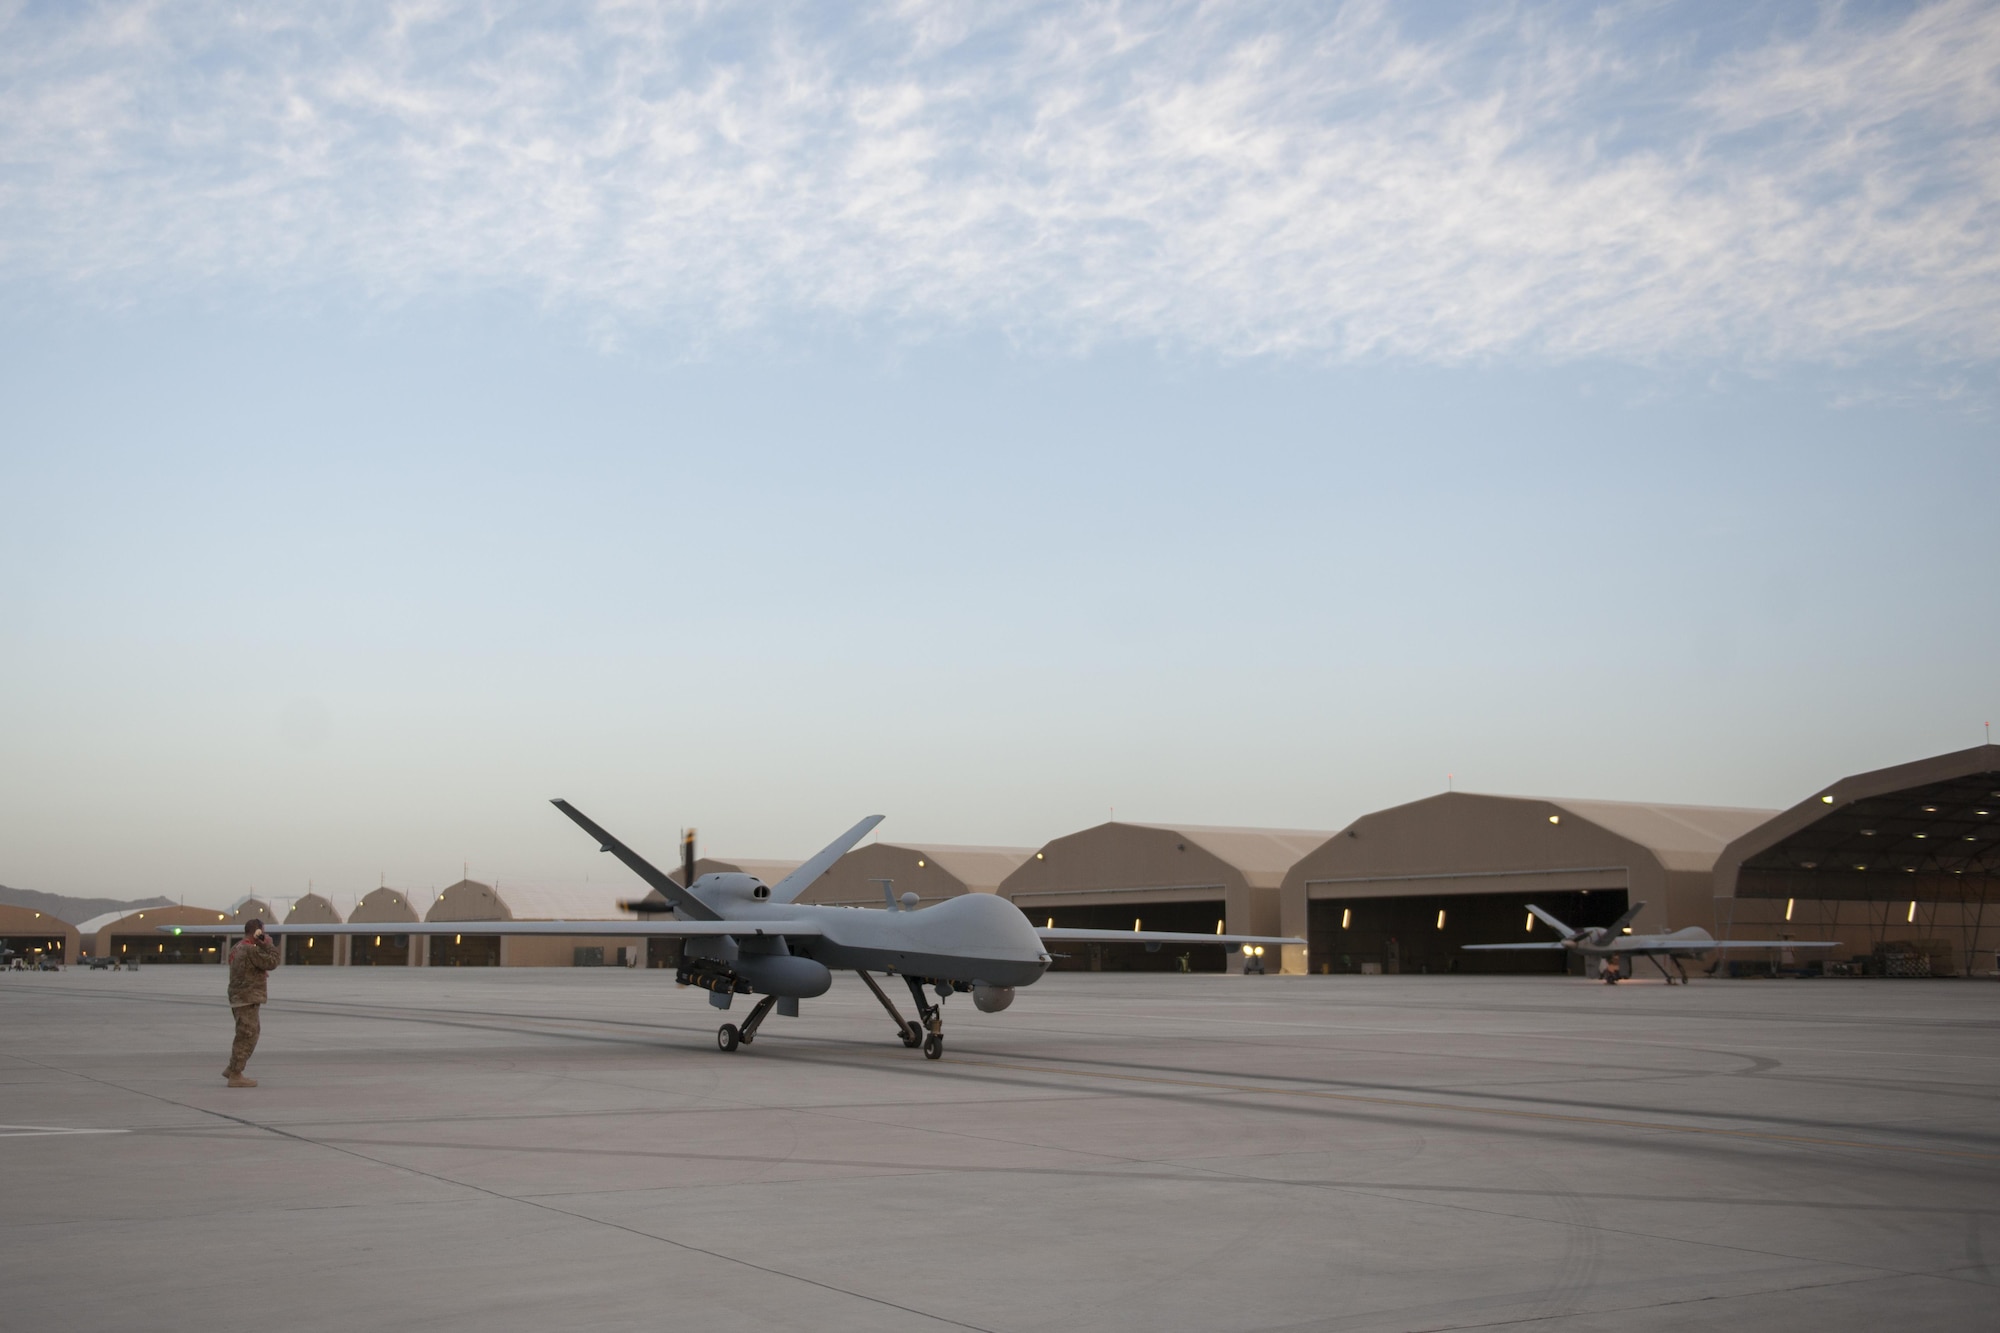 An MQ-9 Reaper equipped with an extended range modification from the 62nd Expeditionary Reconnaissance Squadron stops on the ramp at Kandahar Airfield, Afghanistan, for end of runway checks, Dec. 6, 2015. The Reaper is an armed, multi-mission, medium-altitude, long-endurance remotely piloted aircraft that is employed primarily as an intelligence-collection asset and secondarily against dynamic execution targets. (U.S. Air Force photo by Tech. Sgt. Robert Cloys/Released)